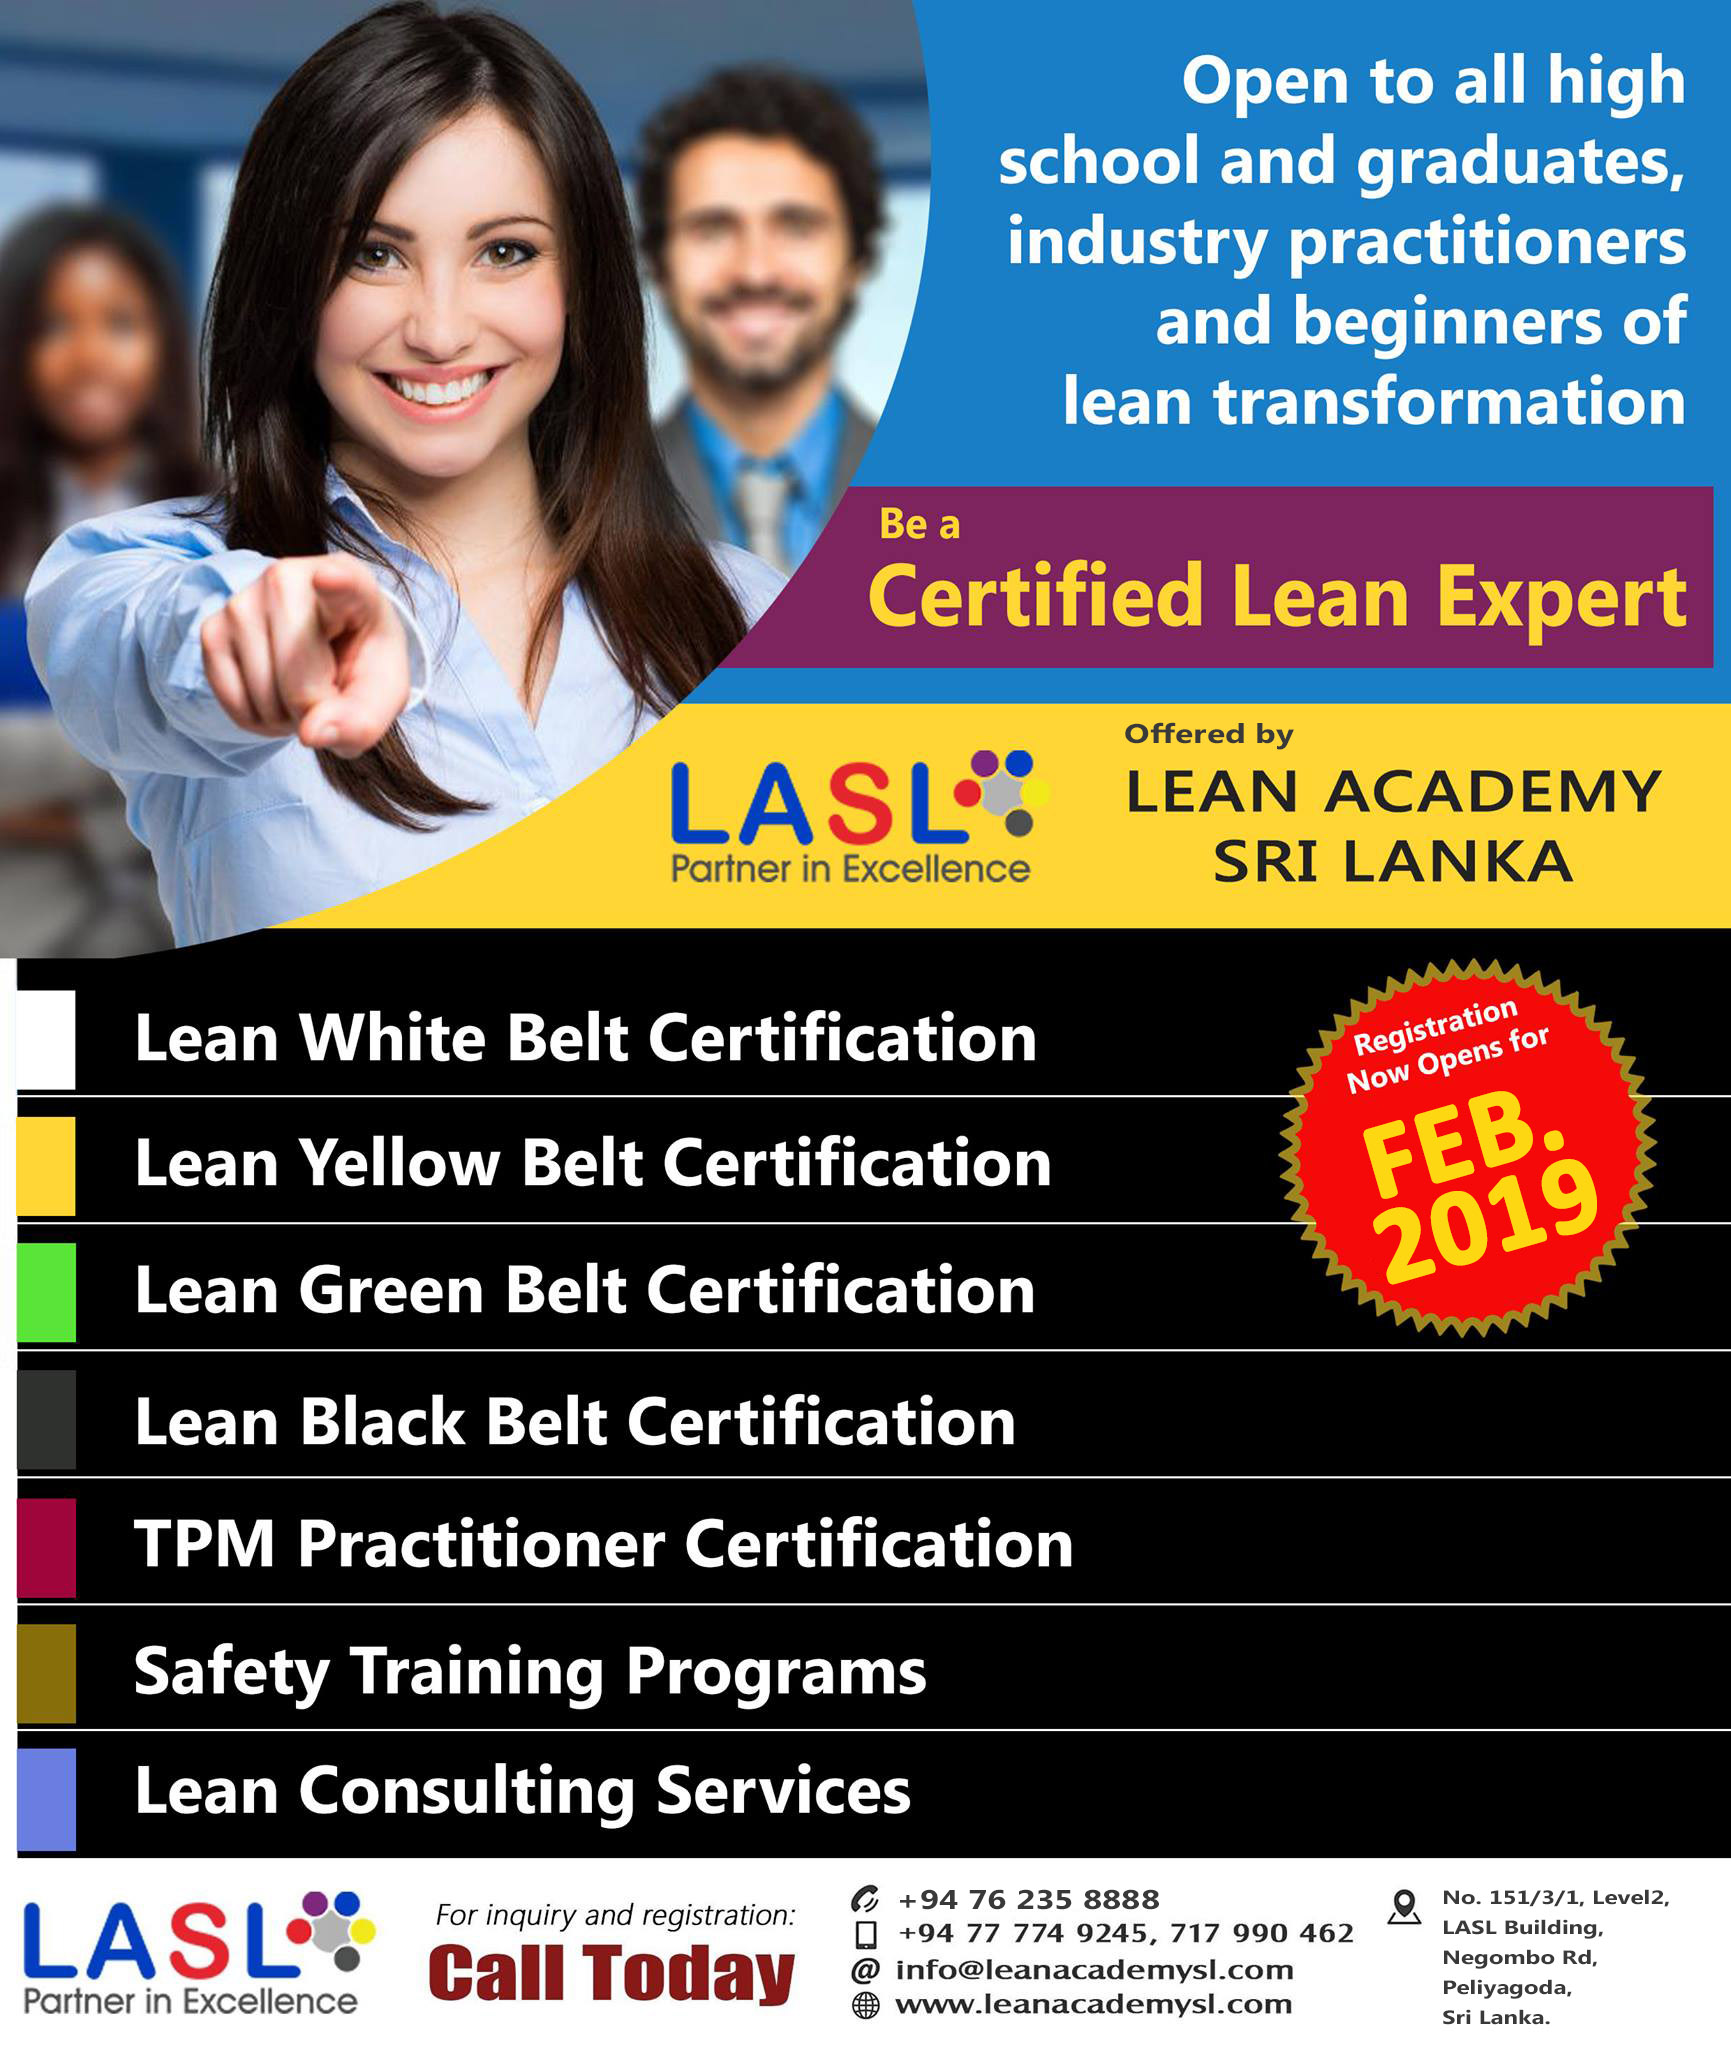 LASL REGISTRATIONS NOW OPEN FOR February and March 2019